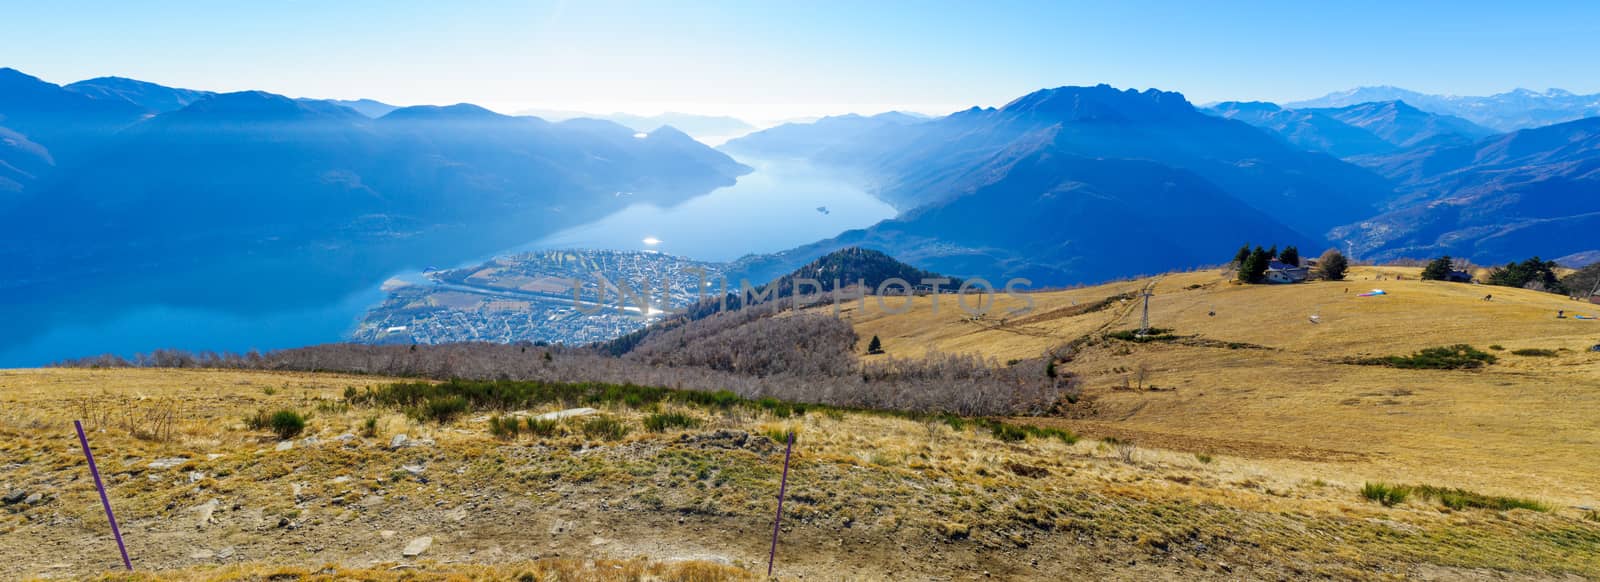 View of Locarno and Lake Maggiore from the Cardada-Cimetta mount by RnDmS